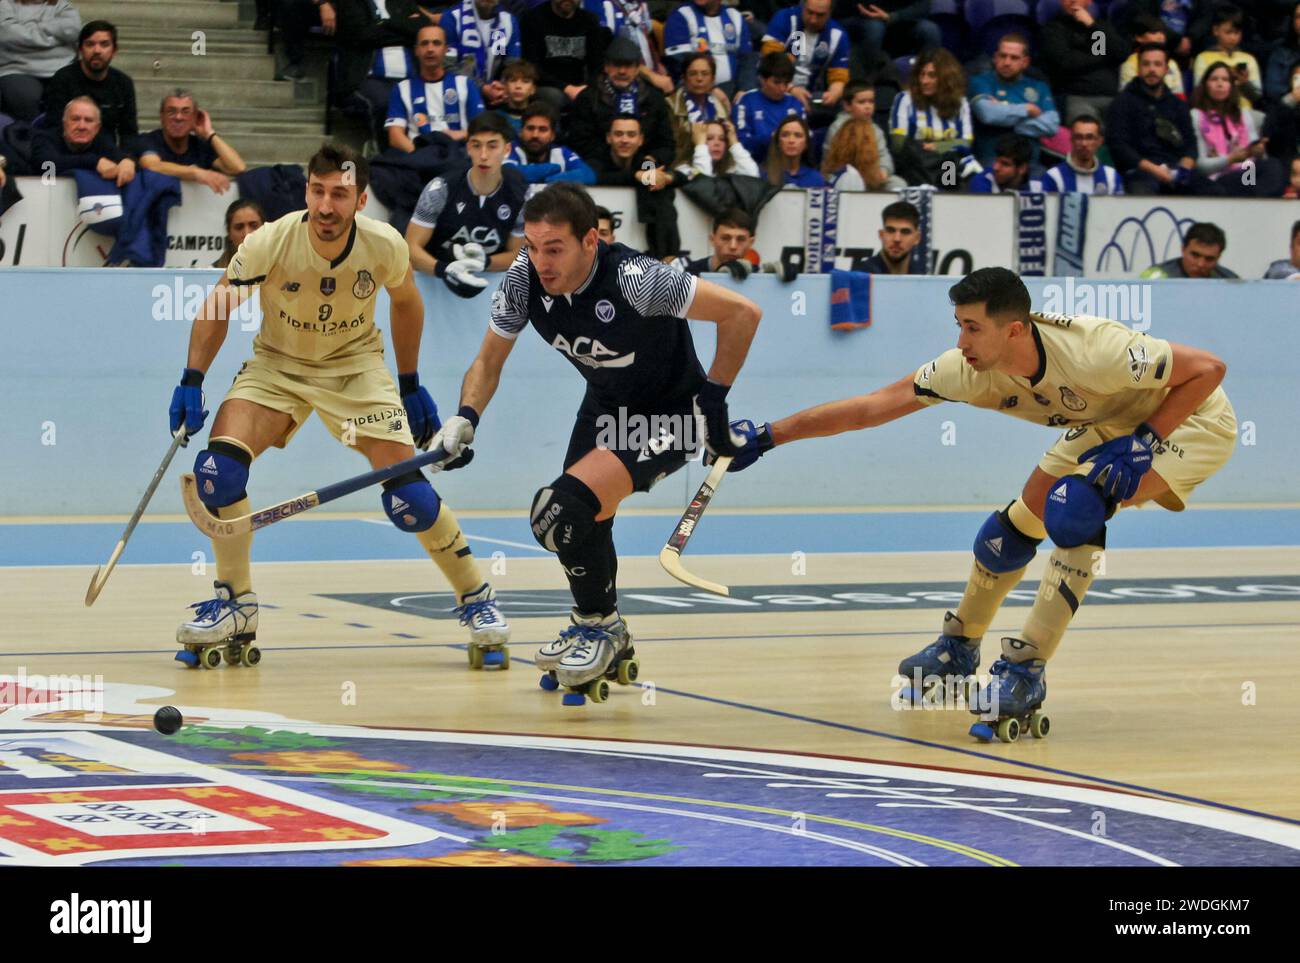 Porto, Portugal. 20th Jan, 2024. Porto, 01/20/2024 - Futebol Clube do Porto hosted Famalicense Atlético Clube this afternoon, at the Pavilhão do Dragão Arena, in a game counting for the 14th Journey - National Roller Hockey Championship - 2023/2024. Juan García; Rafa; Carlo Di Benedetto. (José Carmo/Global Imagens) Credit: Atlantico Press/Alamy Live News Stock Photo